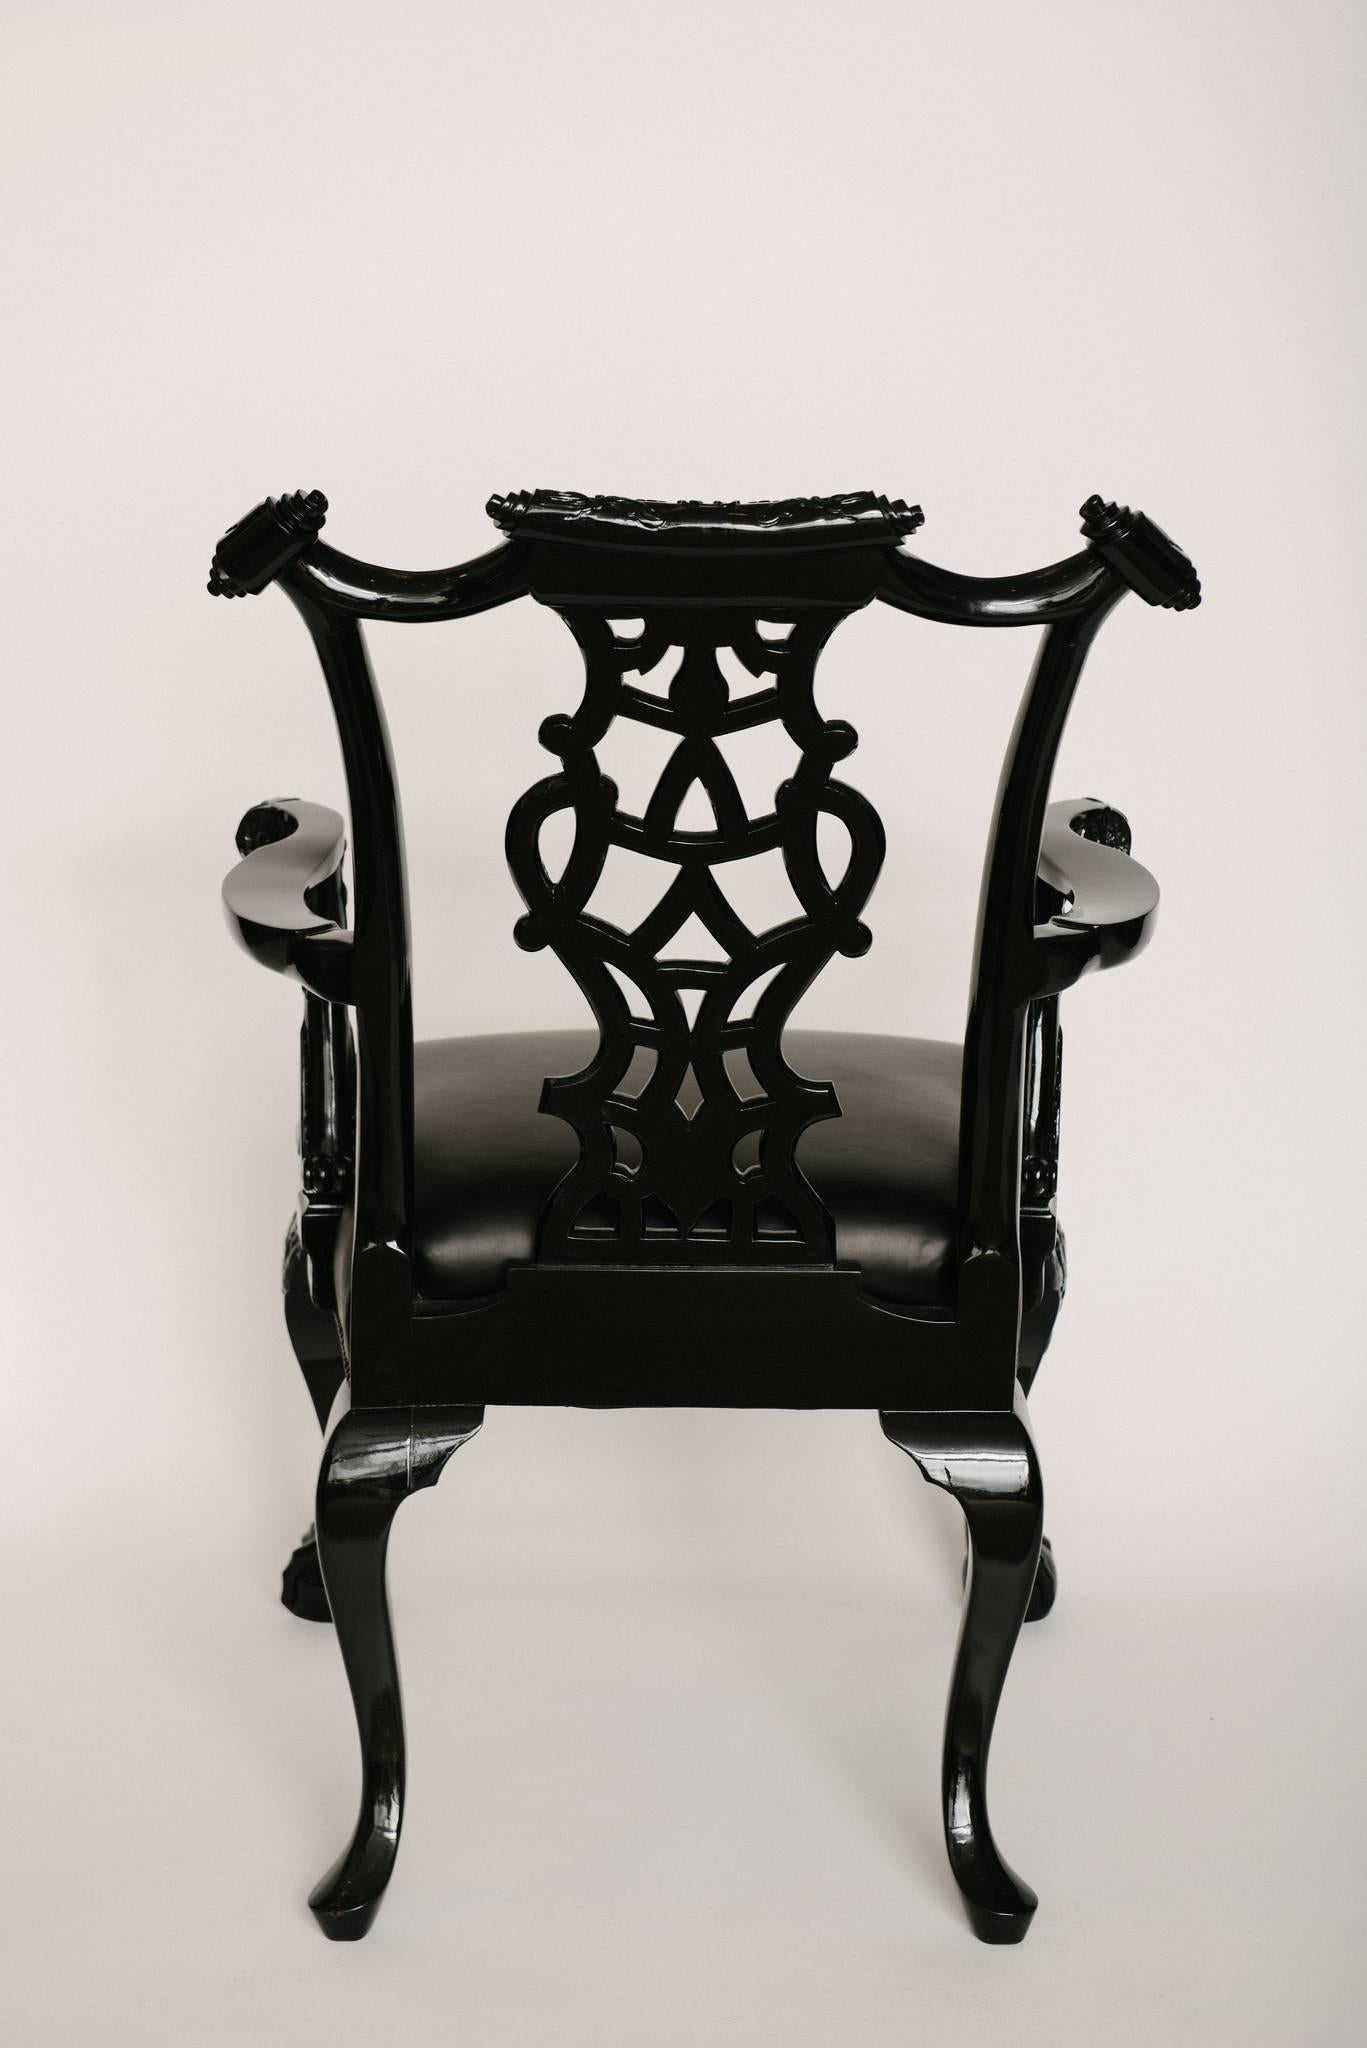 An intricately carved black lacquered 19th century Chippendale style chair newly upholstered in a buttery soft black leather.